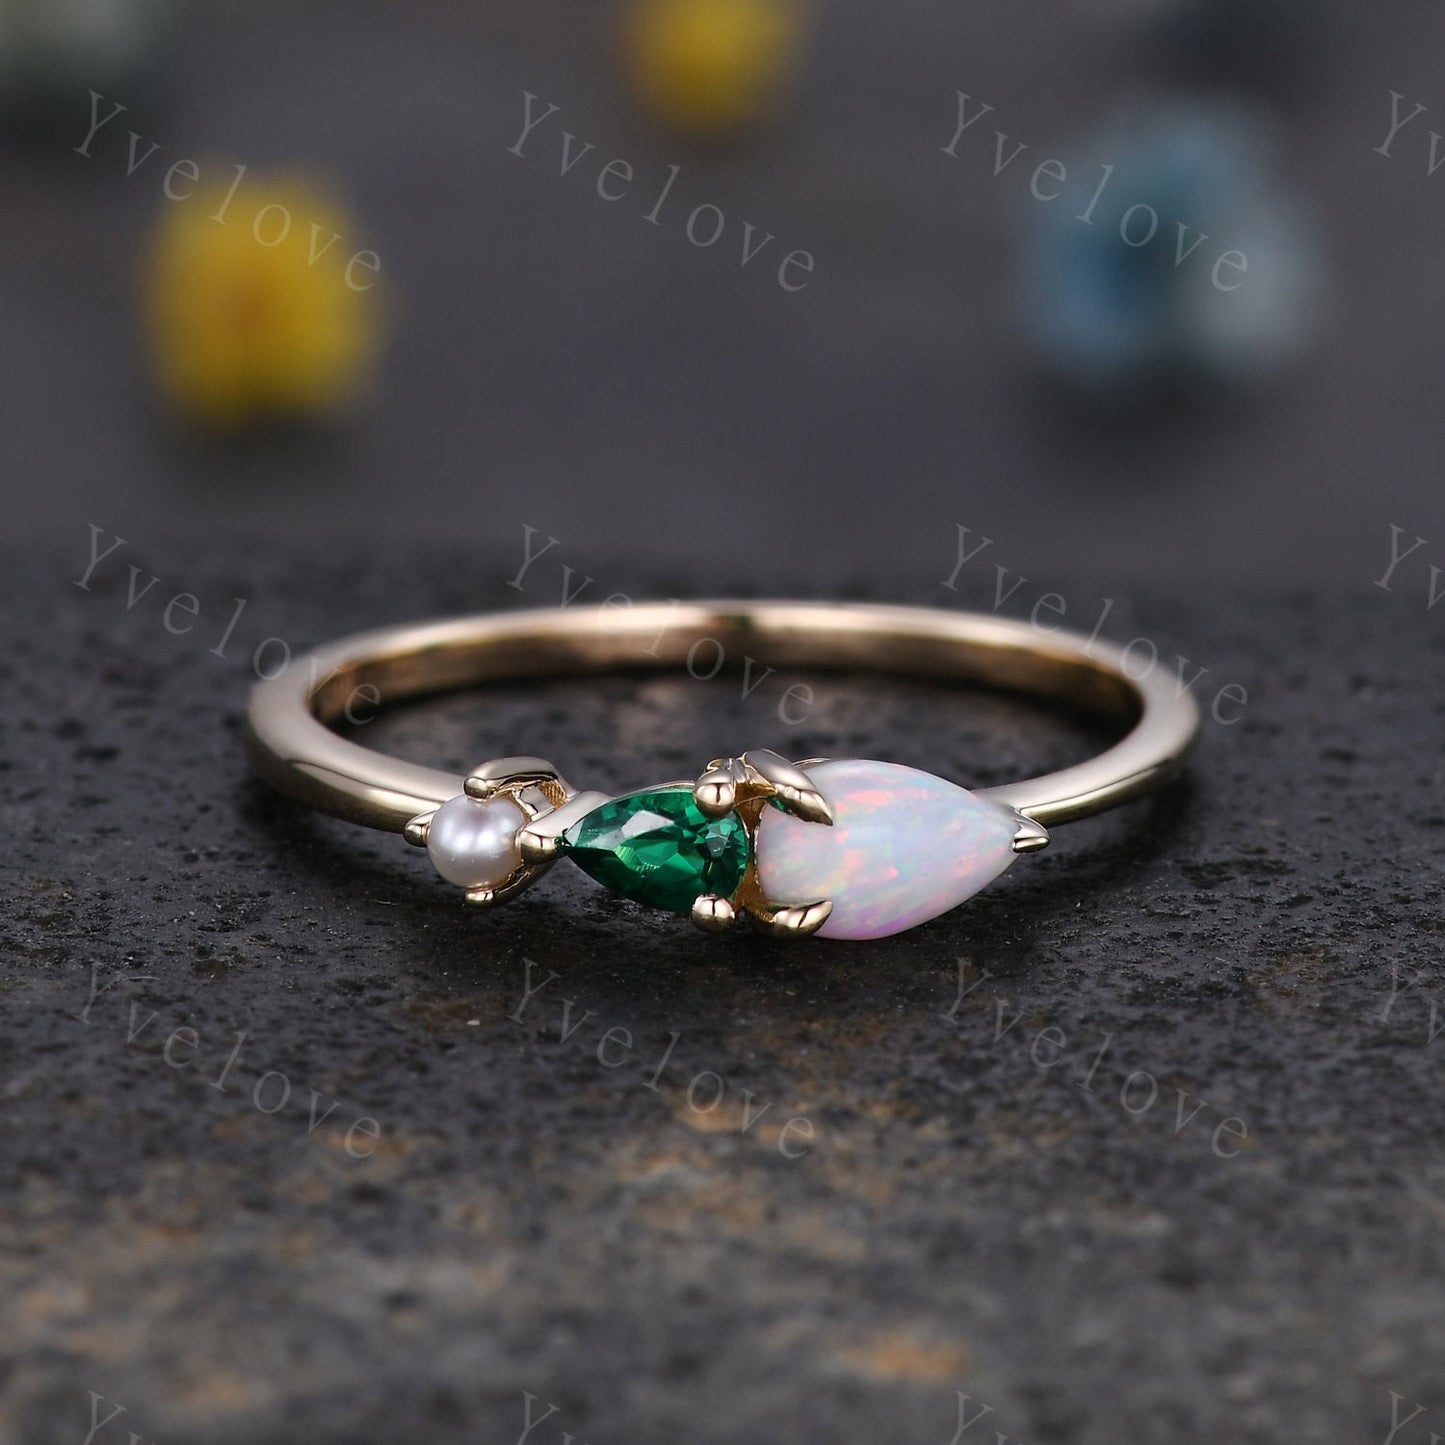 Vintage Opal Emerald Engagement Ring,Pear Cut Gems,Art Deco Pearl Wedding Band,3 Stone Unique Women Bridal Promise Ring,Gold ring,Custom